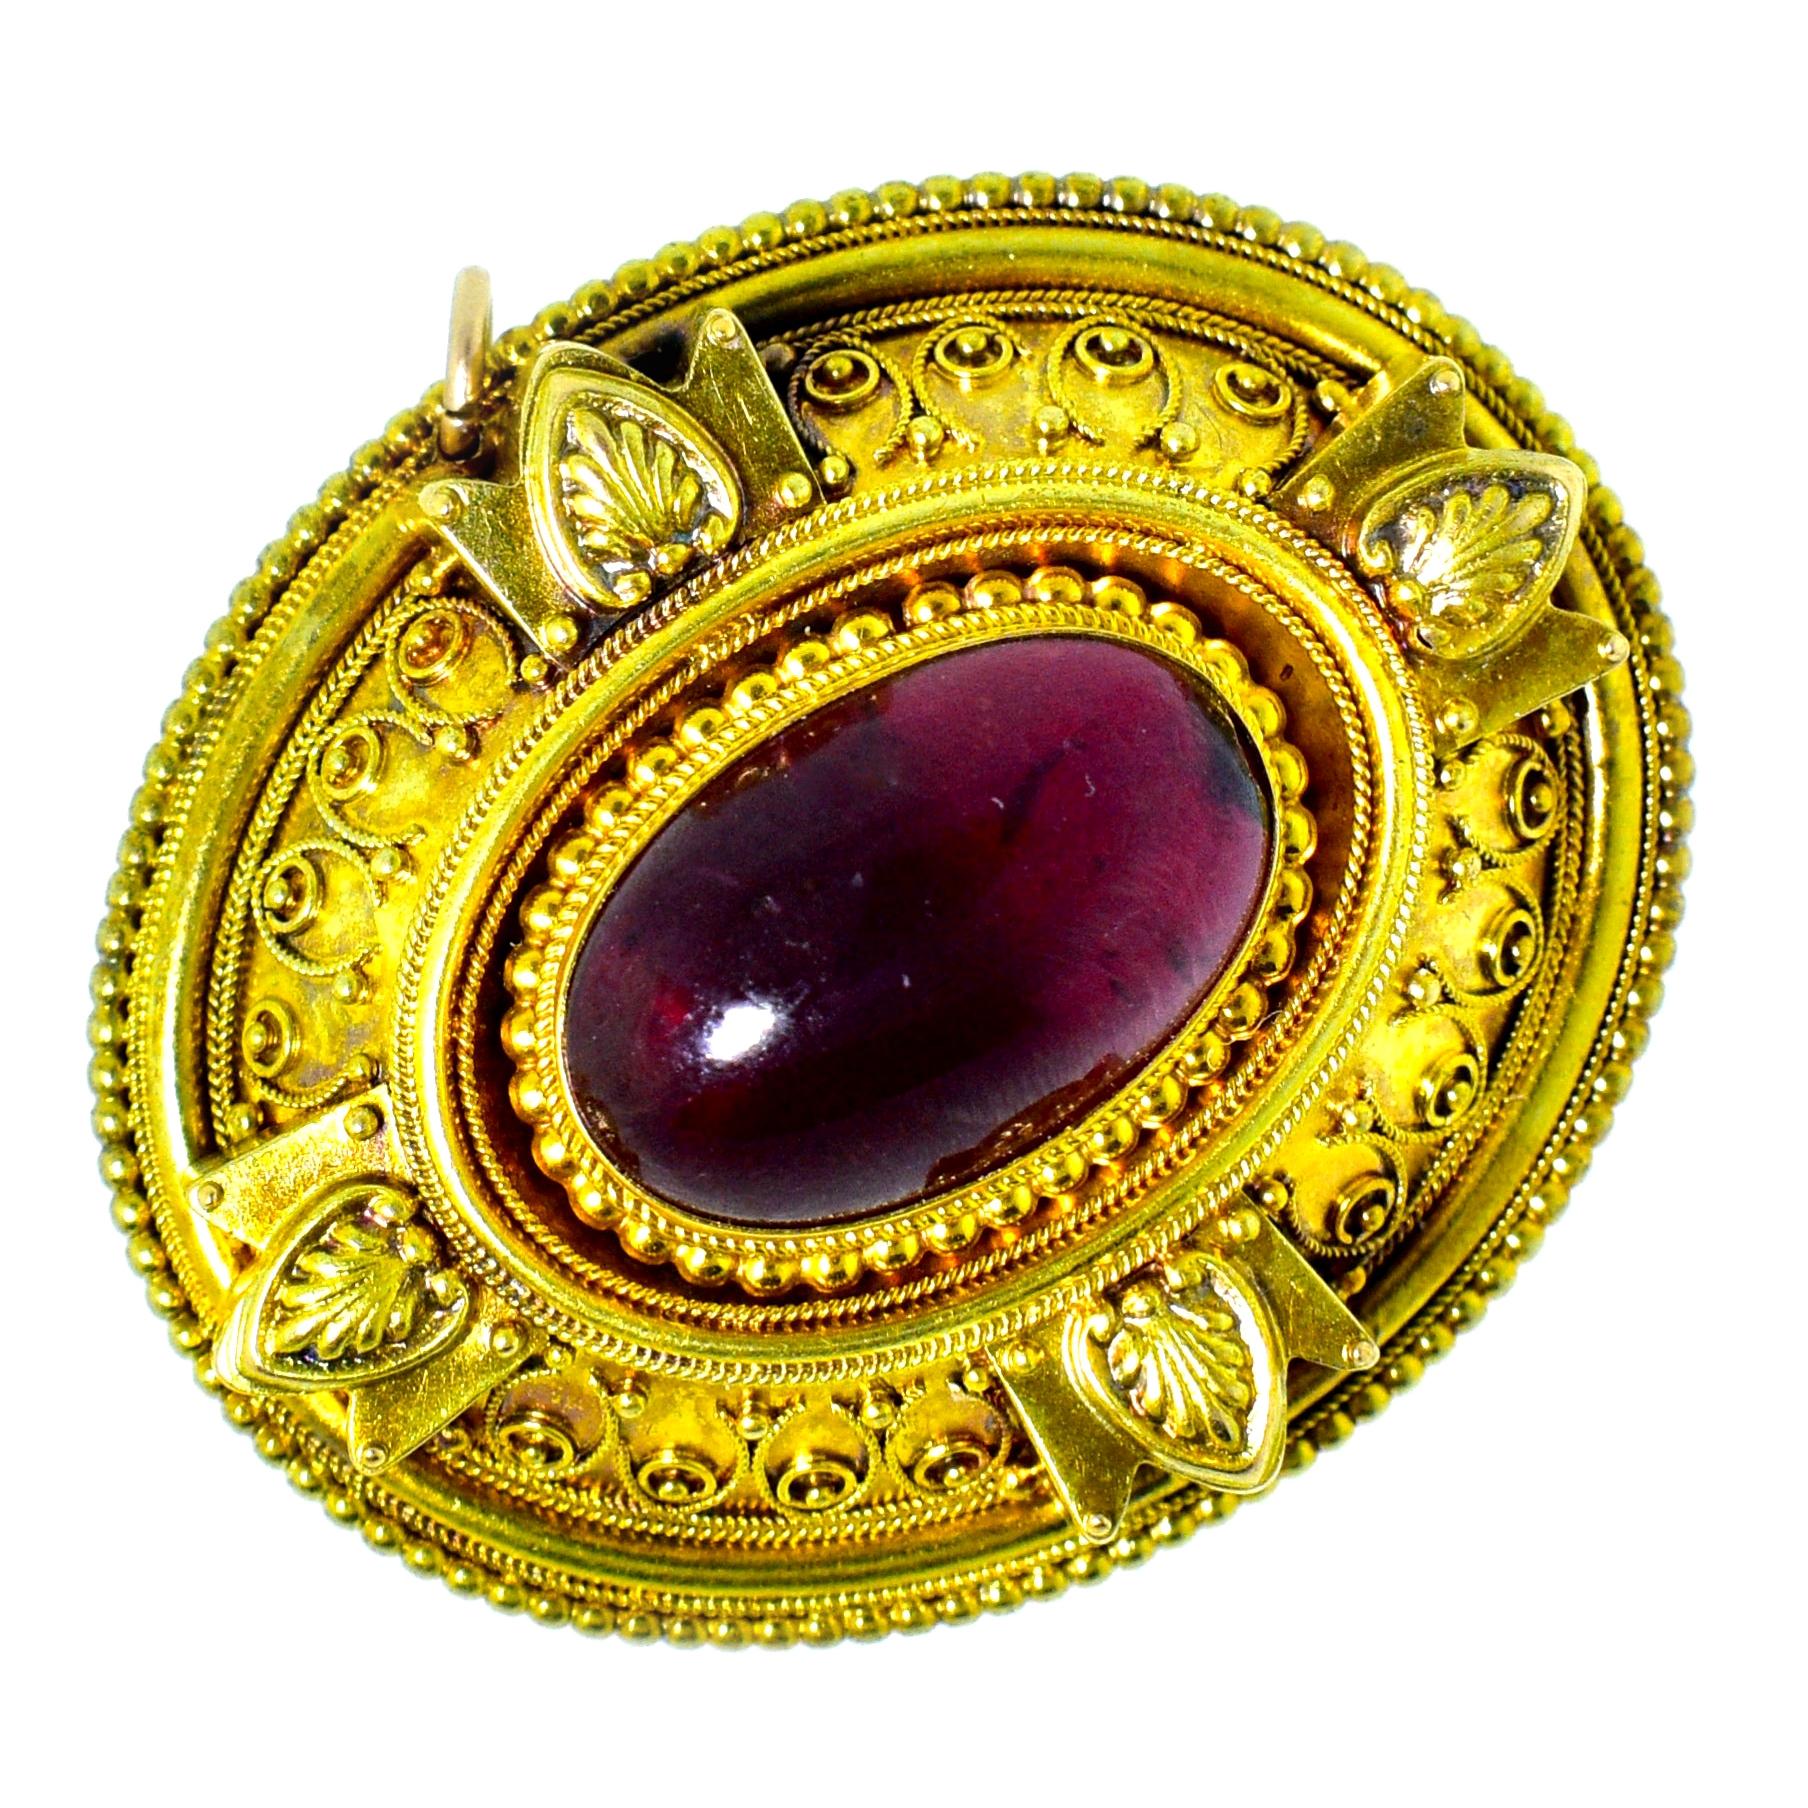 Etruscan, from the last quarter of the Nineteenth Century, large gold antique brooch centering a carbuncle natural garnet weighing approximately 9 cts., and surrounded by fine bead and wire work, Etruscan Revival.  On the verso, is the original hair